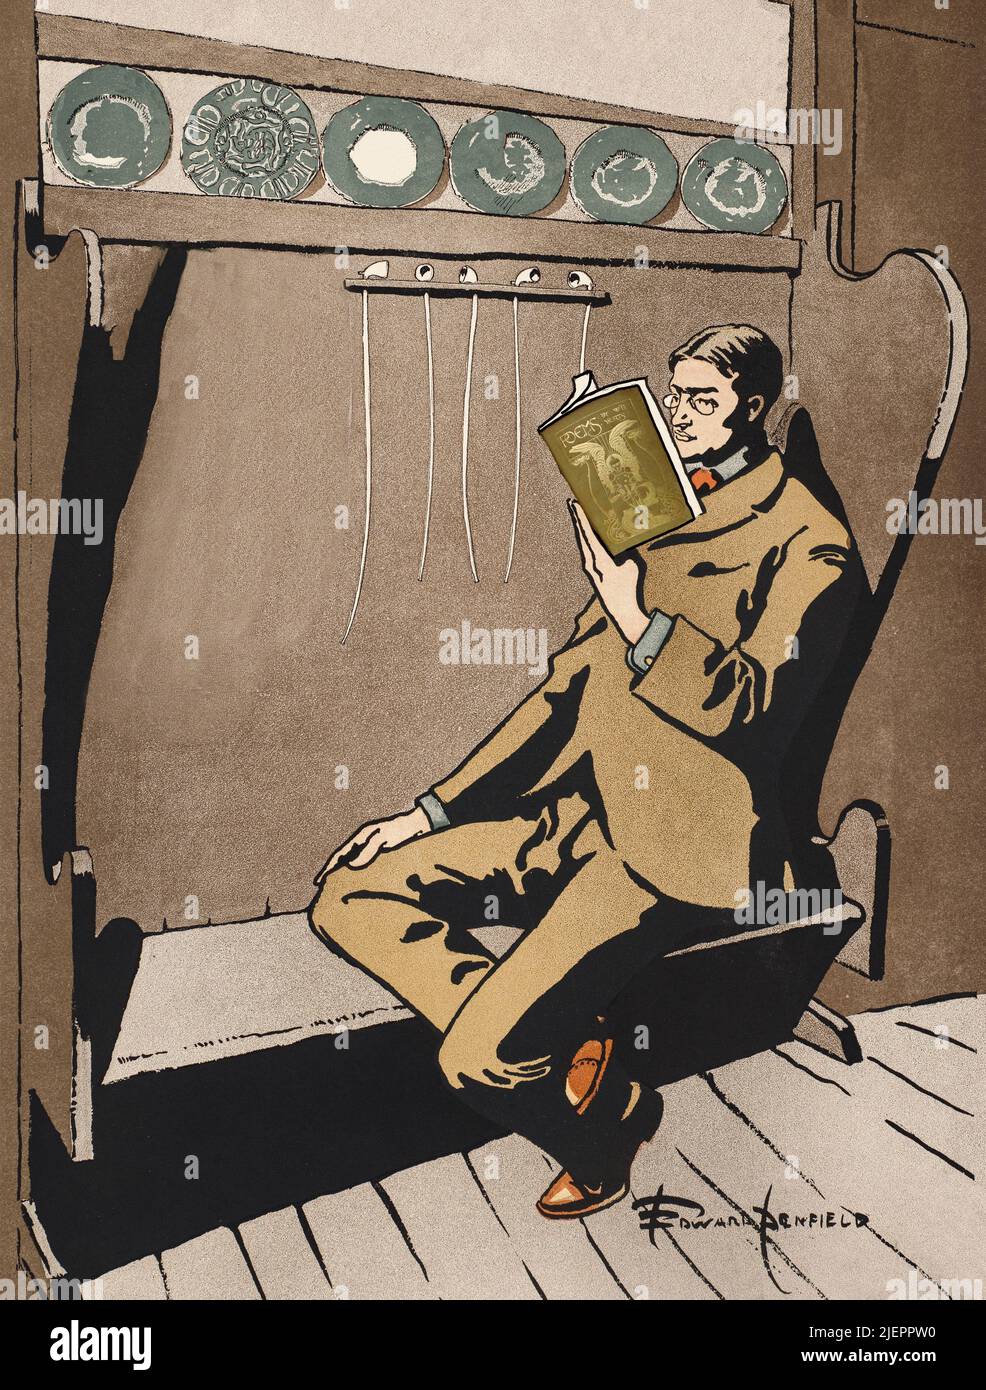 A detail from an early 20th century illustration by Edward Penfield (1866-1925), considered by many to be the father of the American poster, used on the cover of Harper’s Magazine, the oldest general-interest monthly in America. The modified image features a studious man reading a book of poems by W.B.Yeats Stock Photo